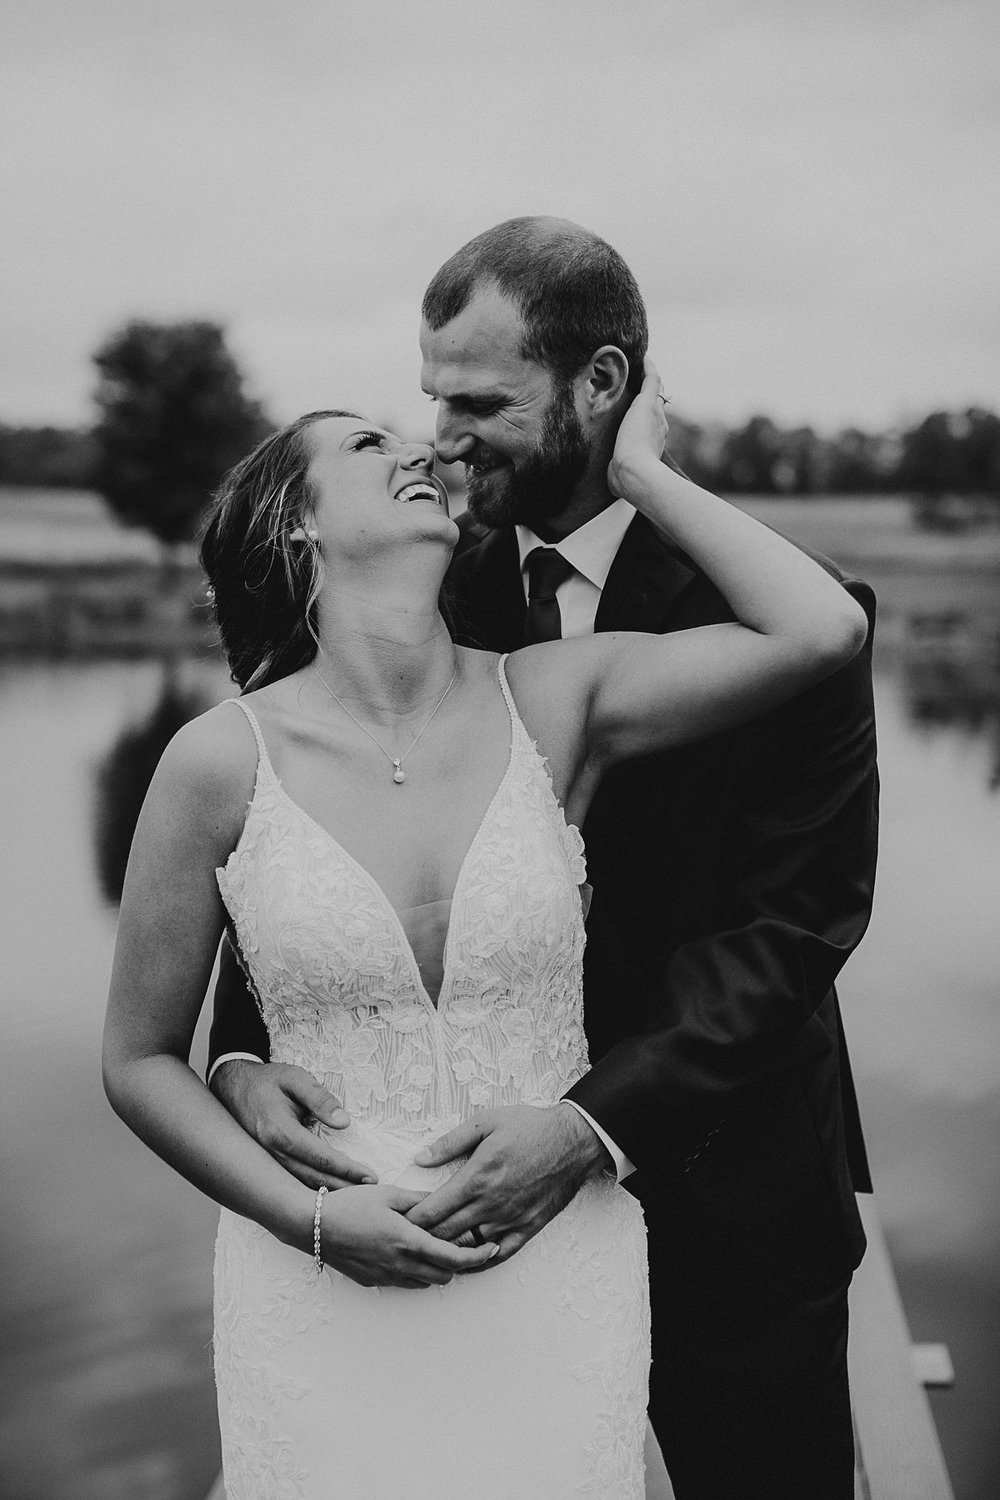 Groom holds bride while she leans back on him laughing